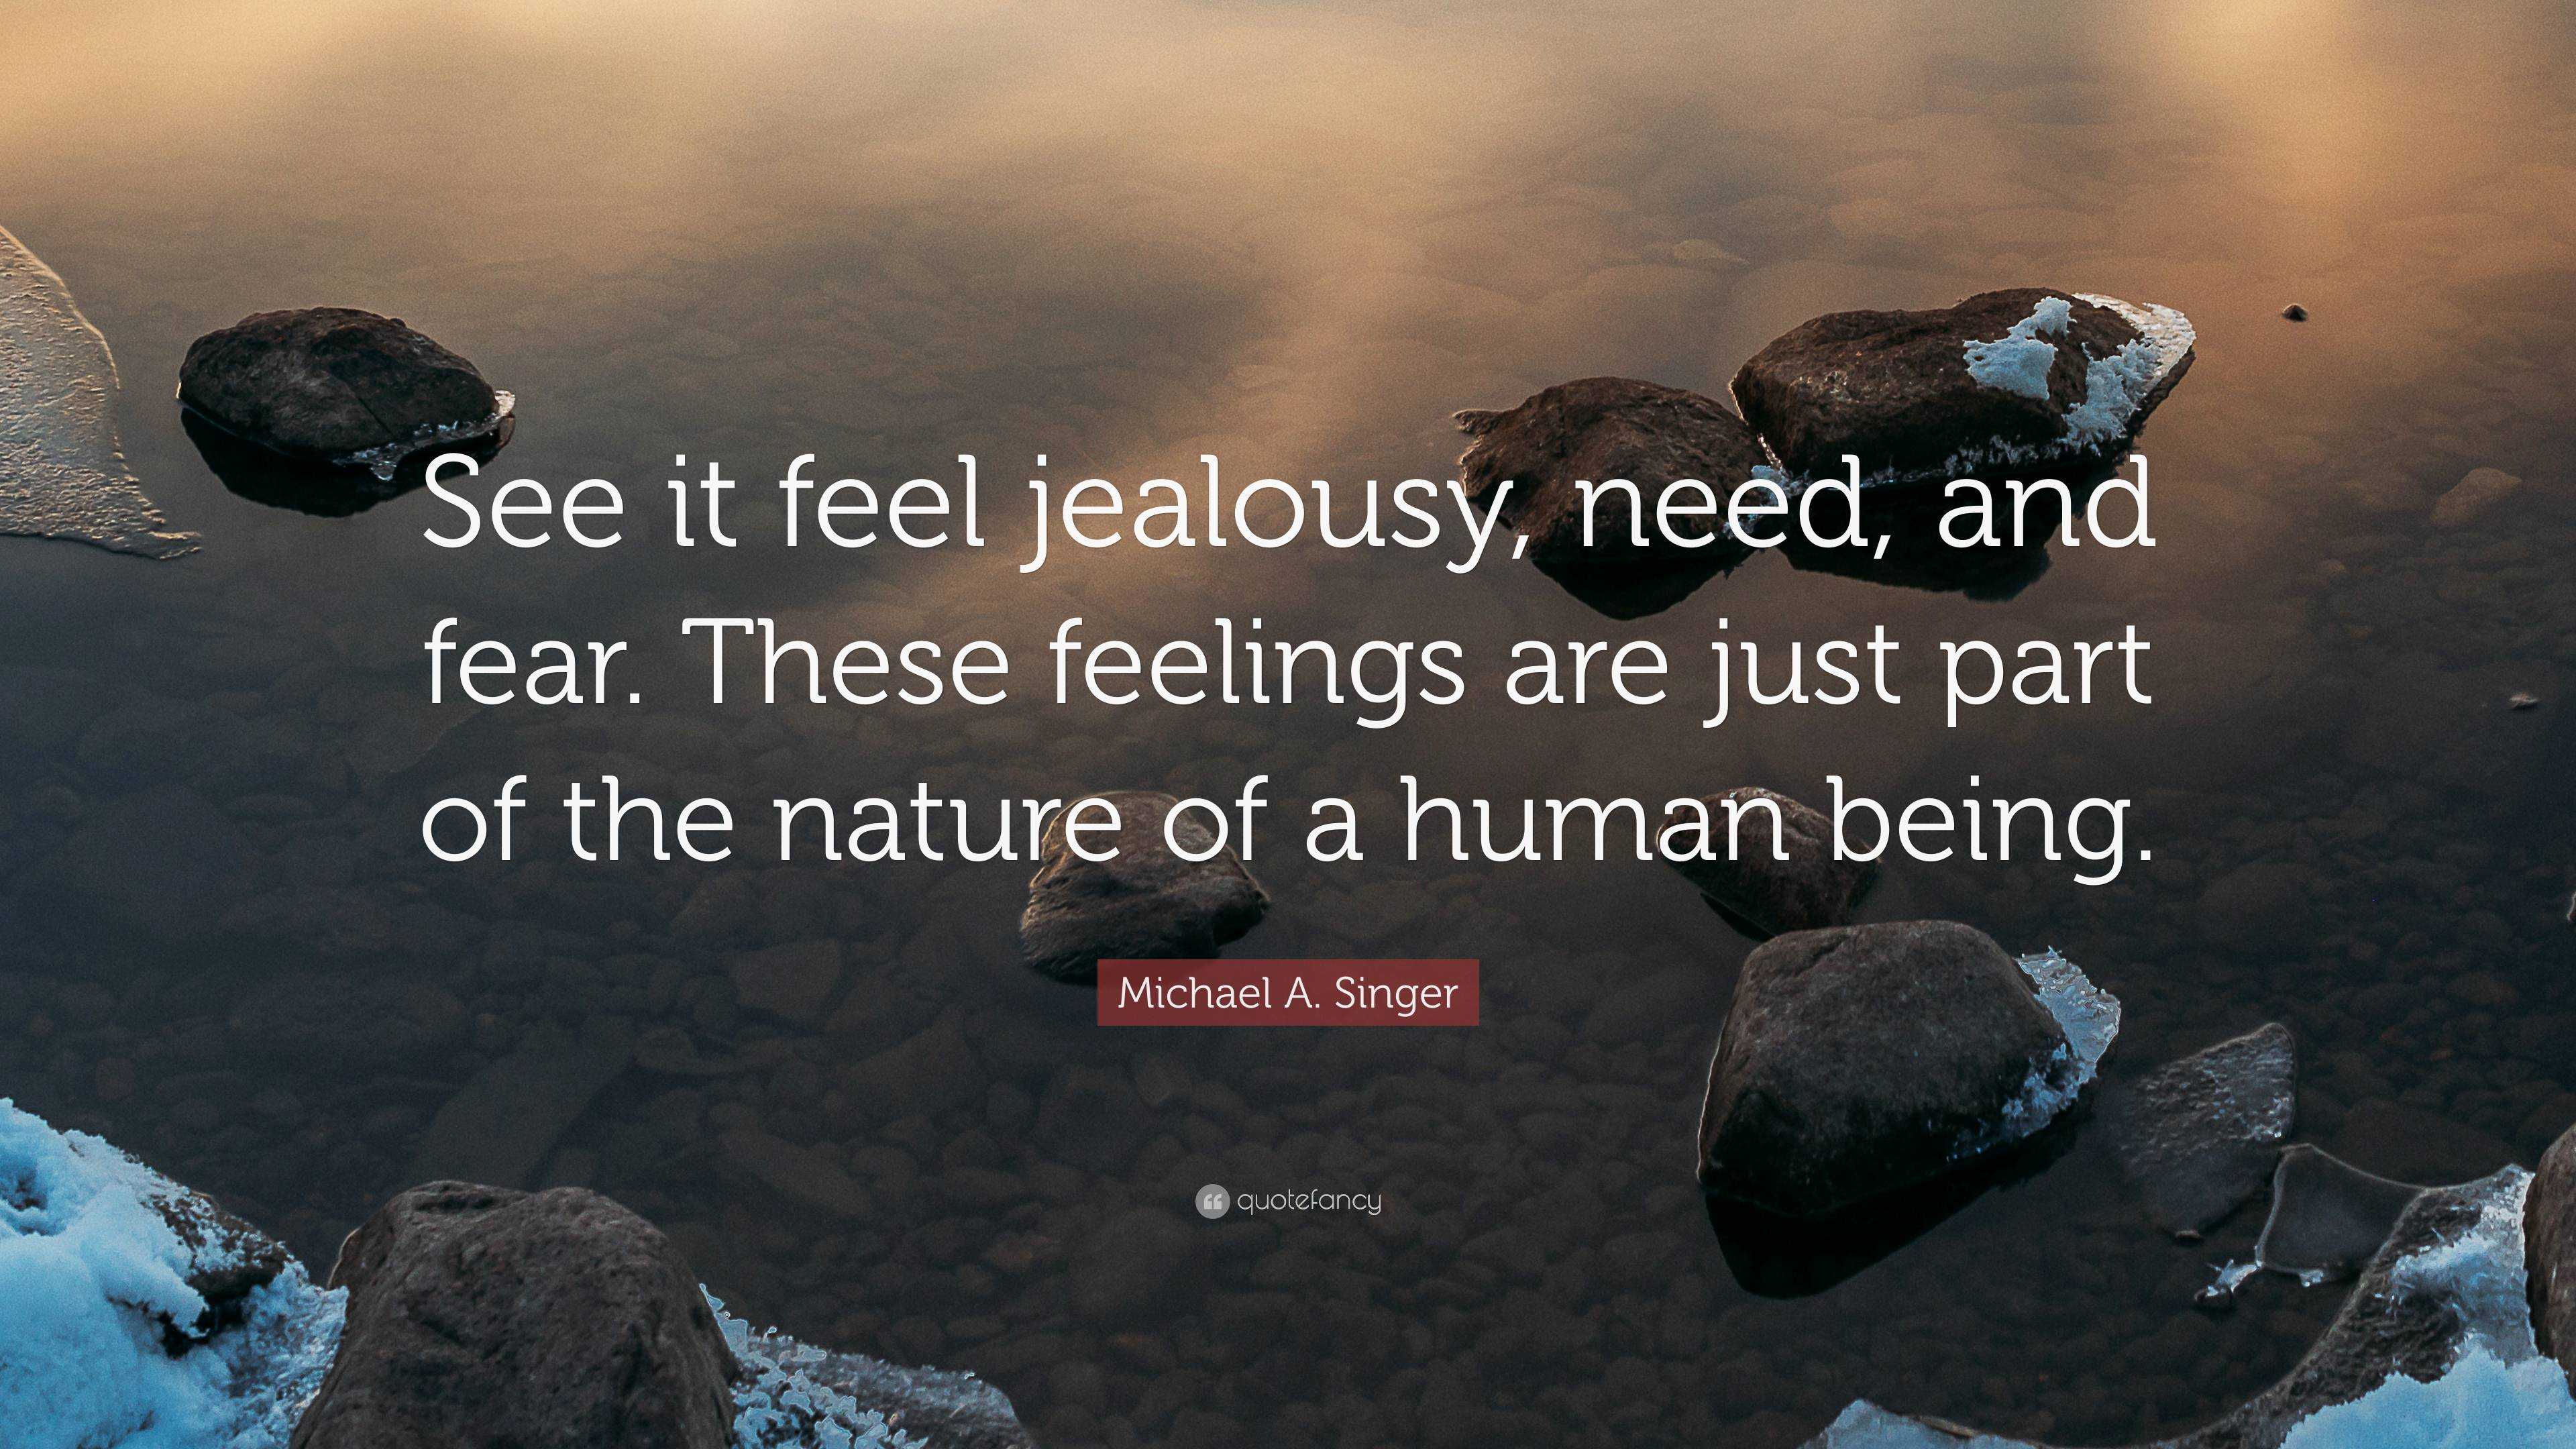 Michael A Singer Quote “see It Feel Jealousy Need And Fear These